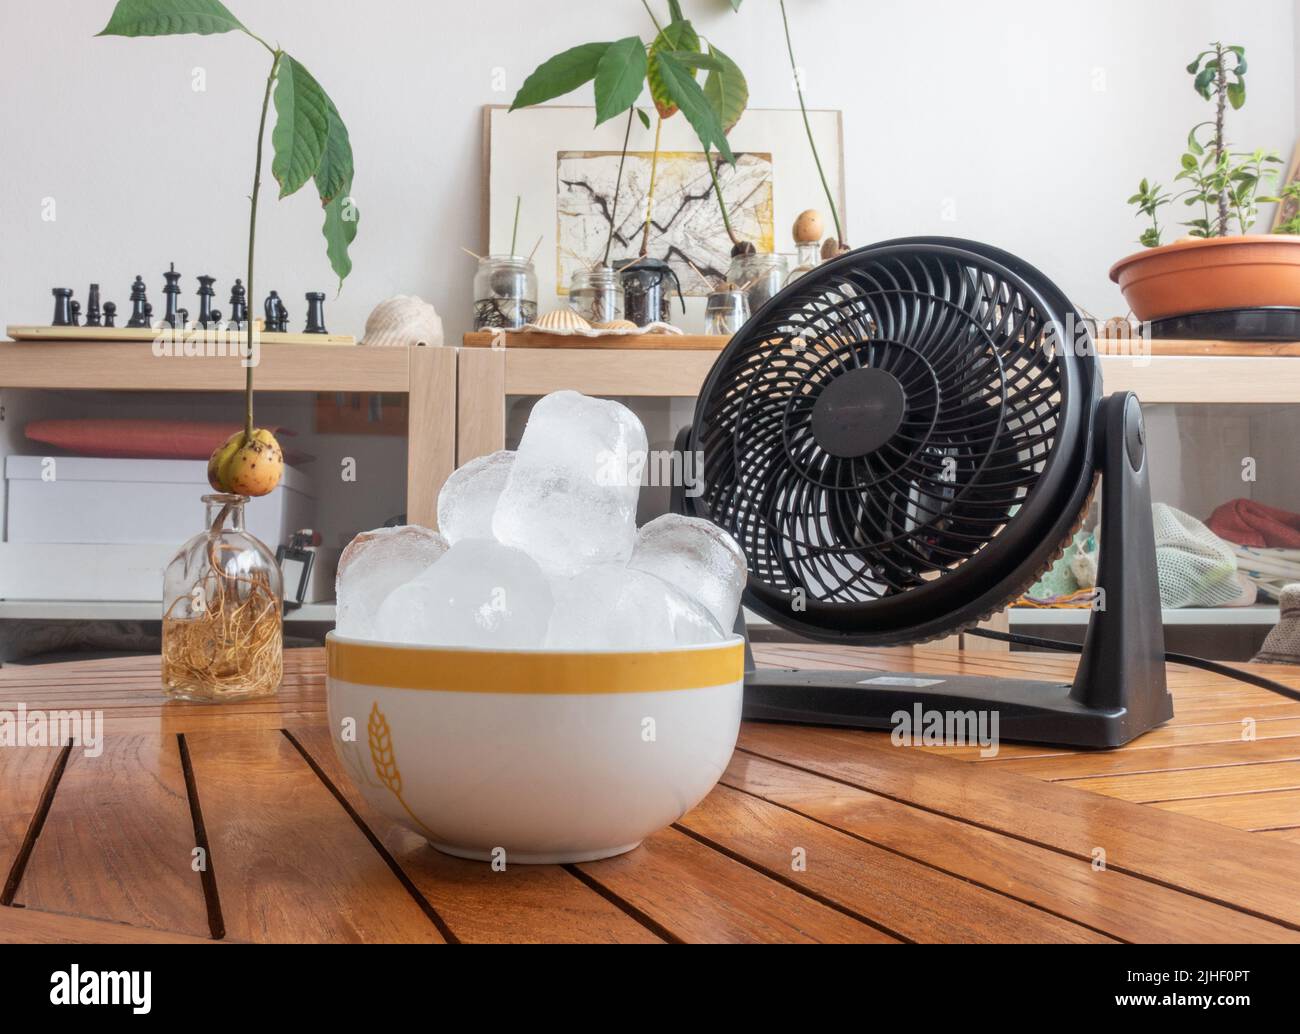 Bowl of ice in front of electric fan during heatwave. Stock Photo